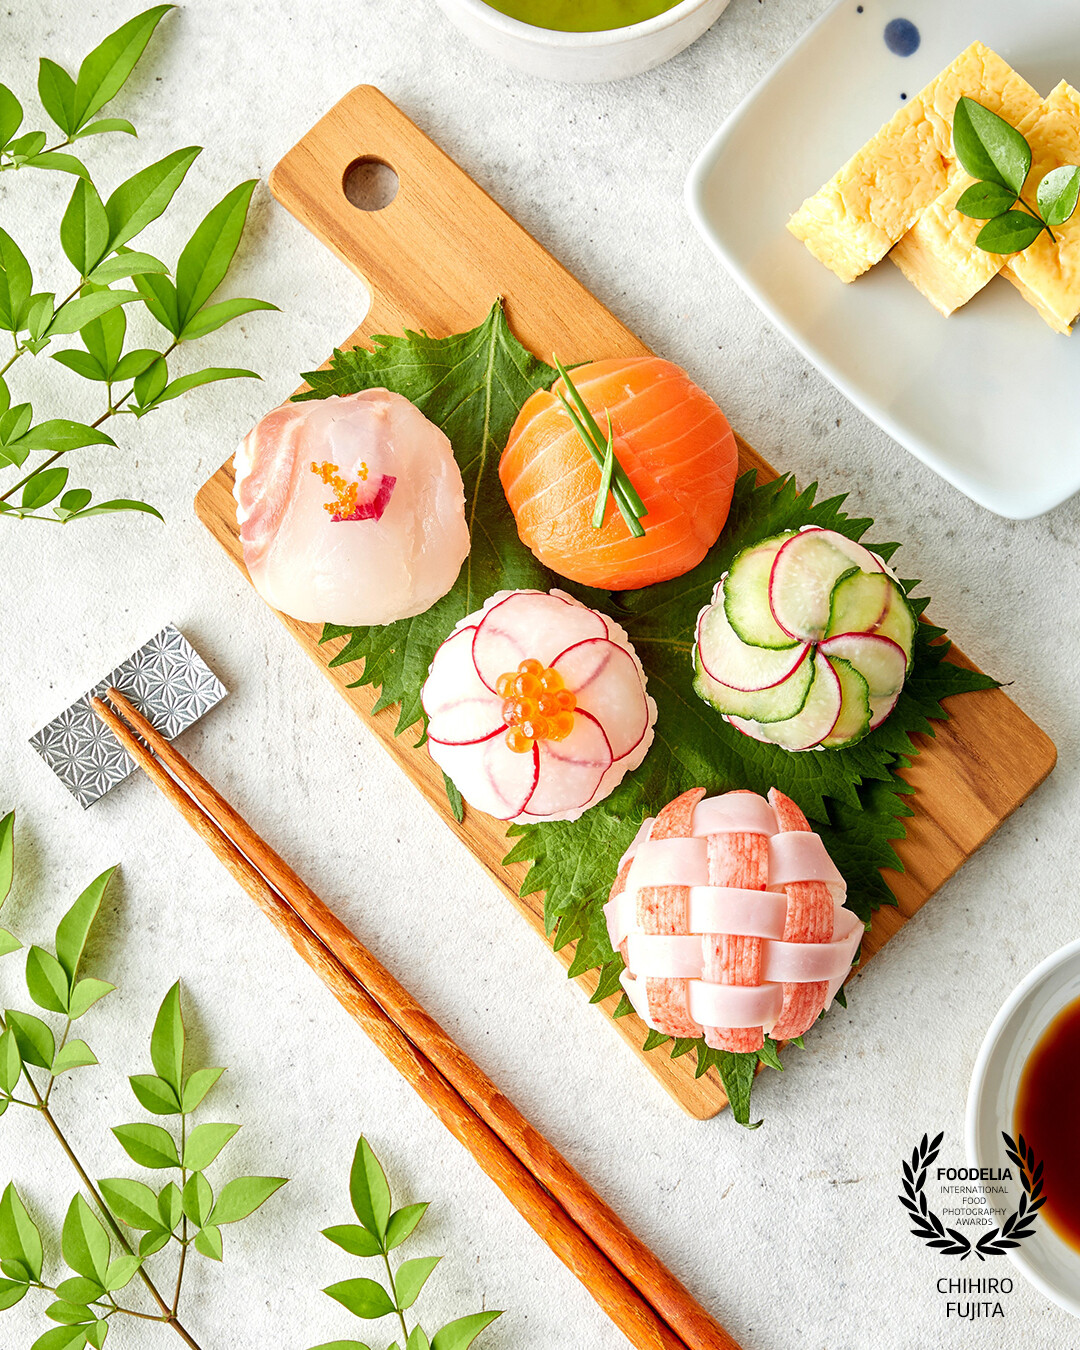 Temari sushi is a dish that a small piece of various ingredients, such as vegetables, egg, or fish fillets is colorfully put on a bite-size vinegared rice ball.<br />
Temari sushi can enjoy various tastes and appearances depending on the arrangement. It is a very artistic dish that is easy to make.